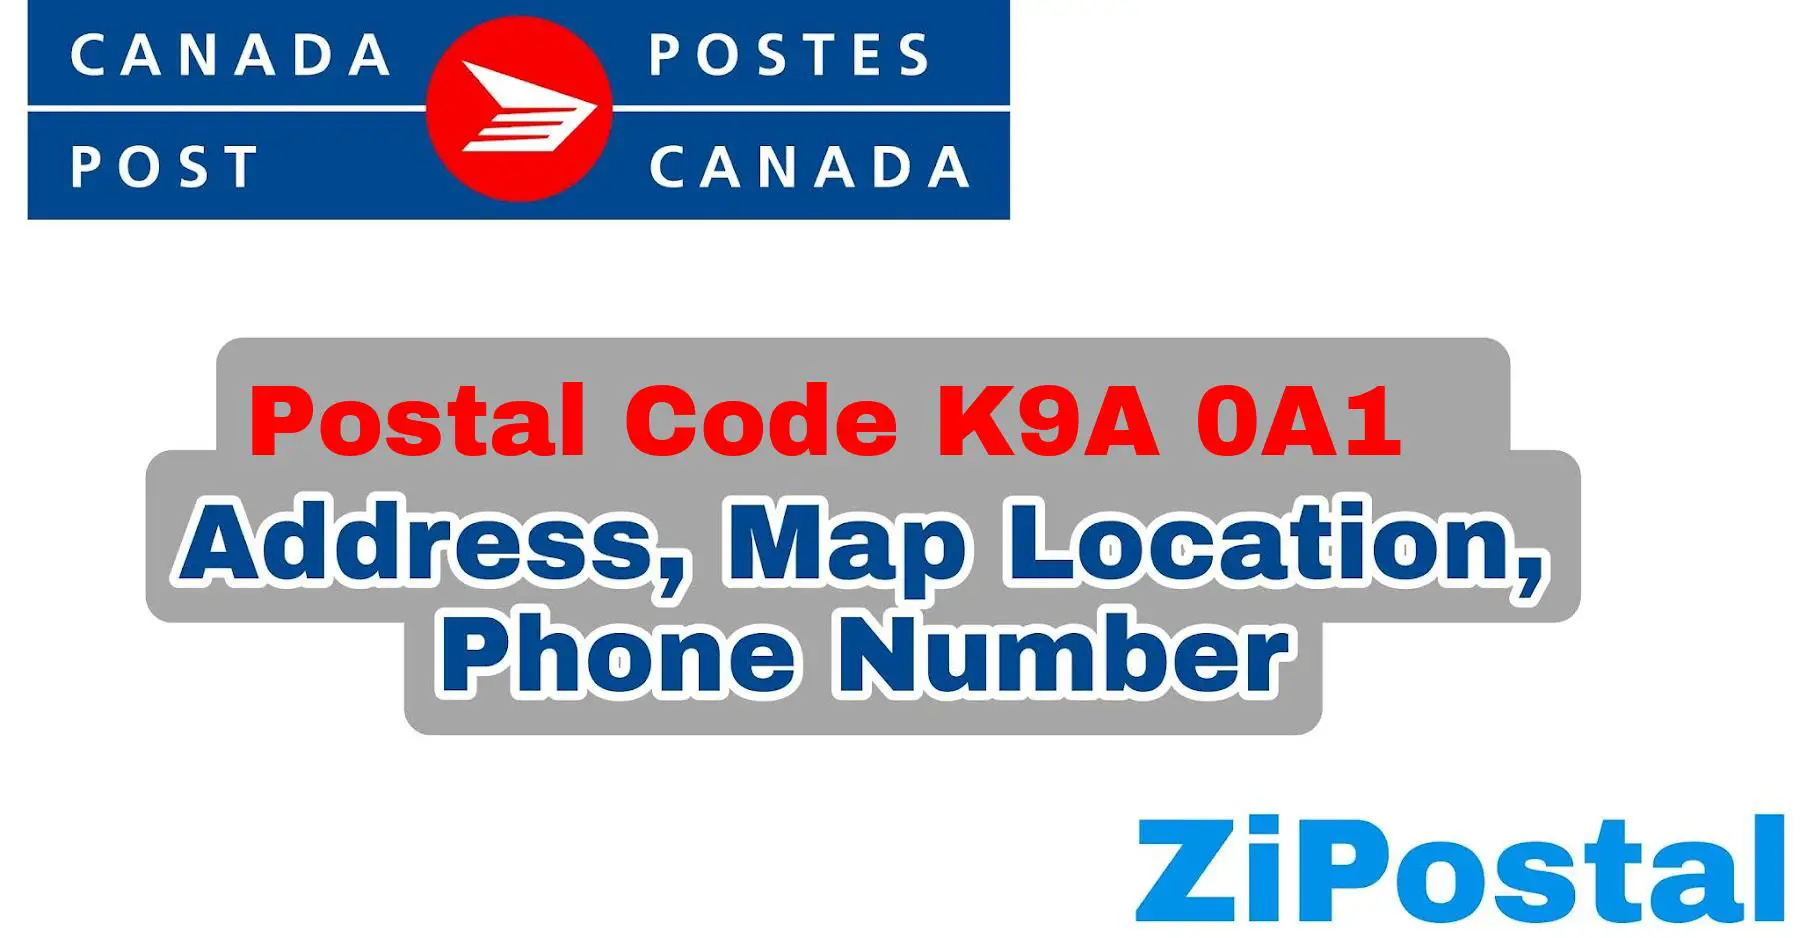 Postal Code K9A 0A1 Address Map Location and Phone Number